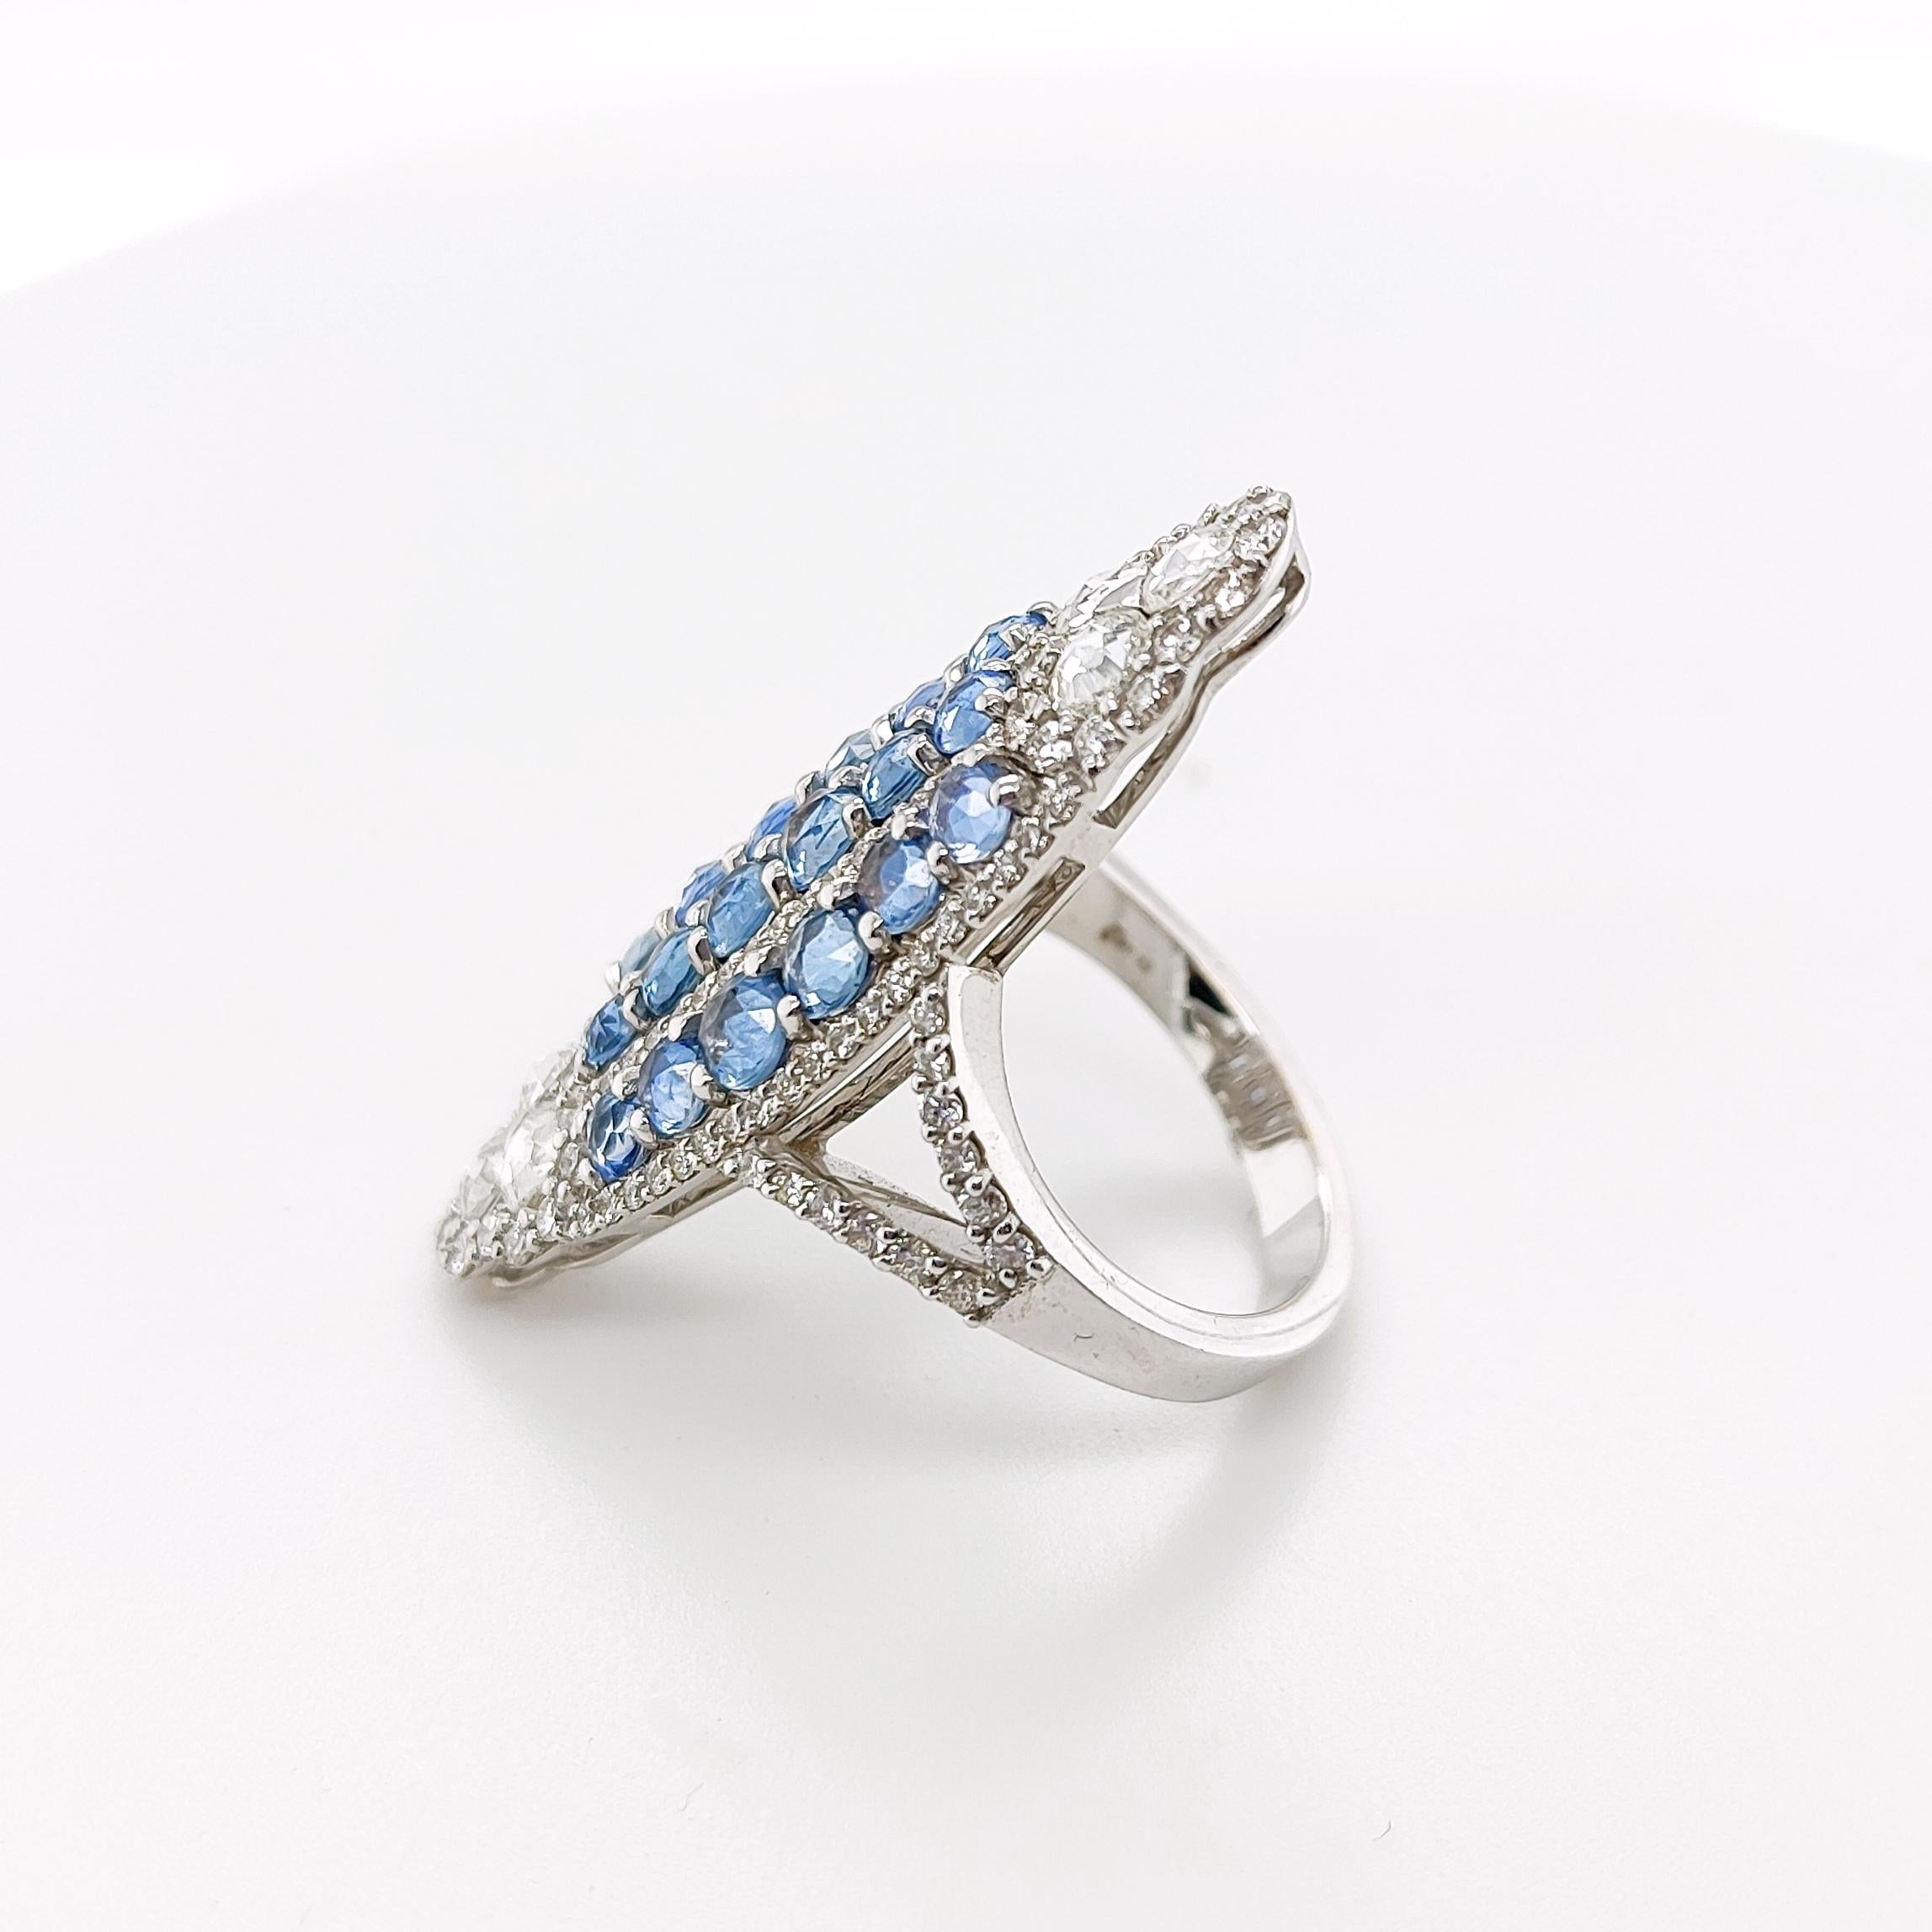 This magnificent CLIO cocktail ring is extremely versatile. You can wear it in a casual mode with jeans and a tshirt or it may be a head-turner ring at cocktails or galas. The diamonds are hand set following the expertise of our Italian artisans and